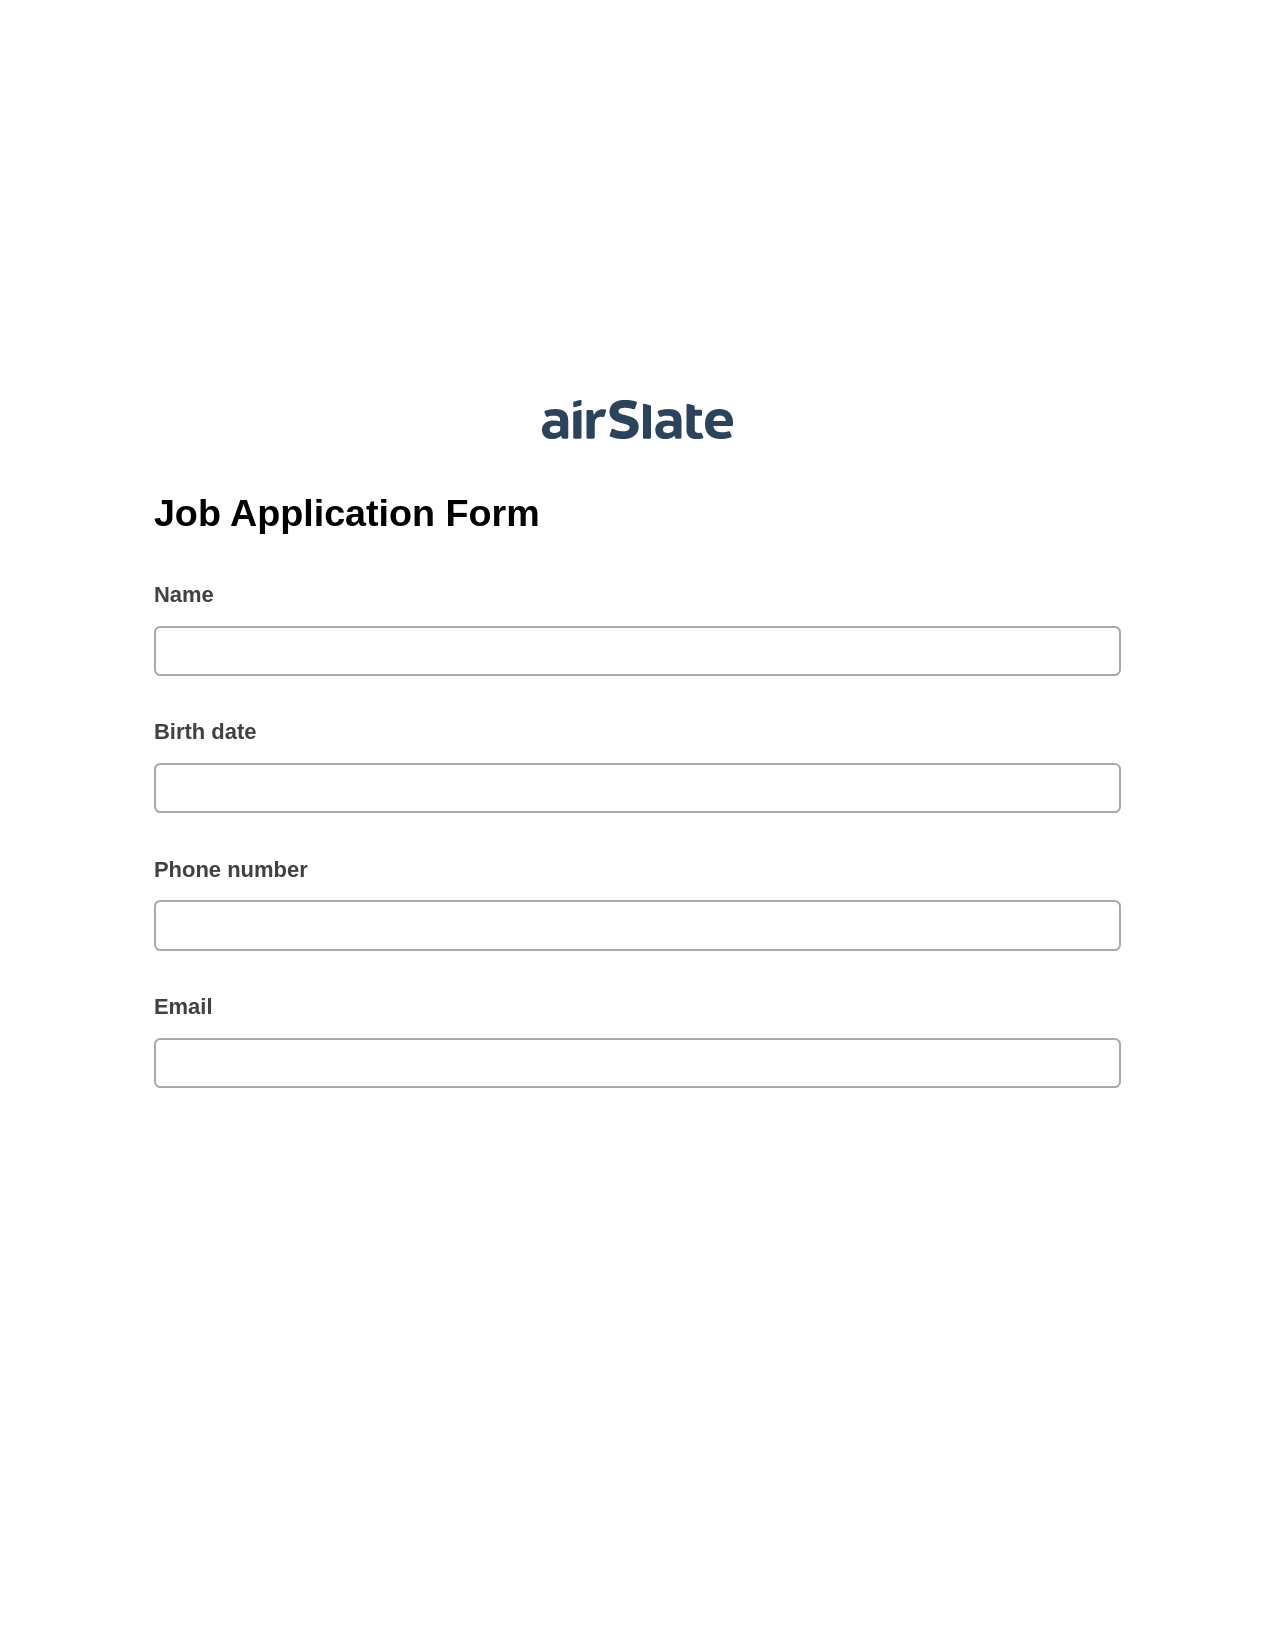 Multirole Job Application Form Pre-fill from Salesforce Record Bot, Create MS Dynamics 365 Records Bot, Post-finish Document Bot